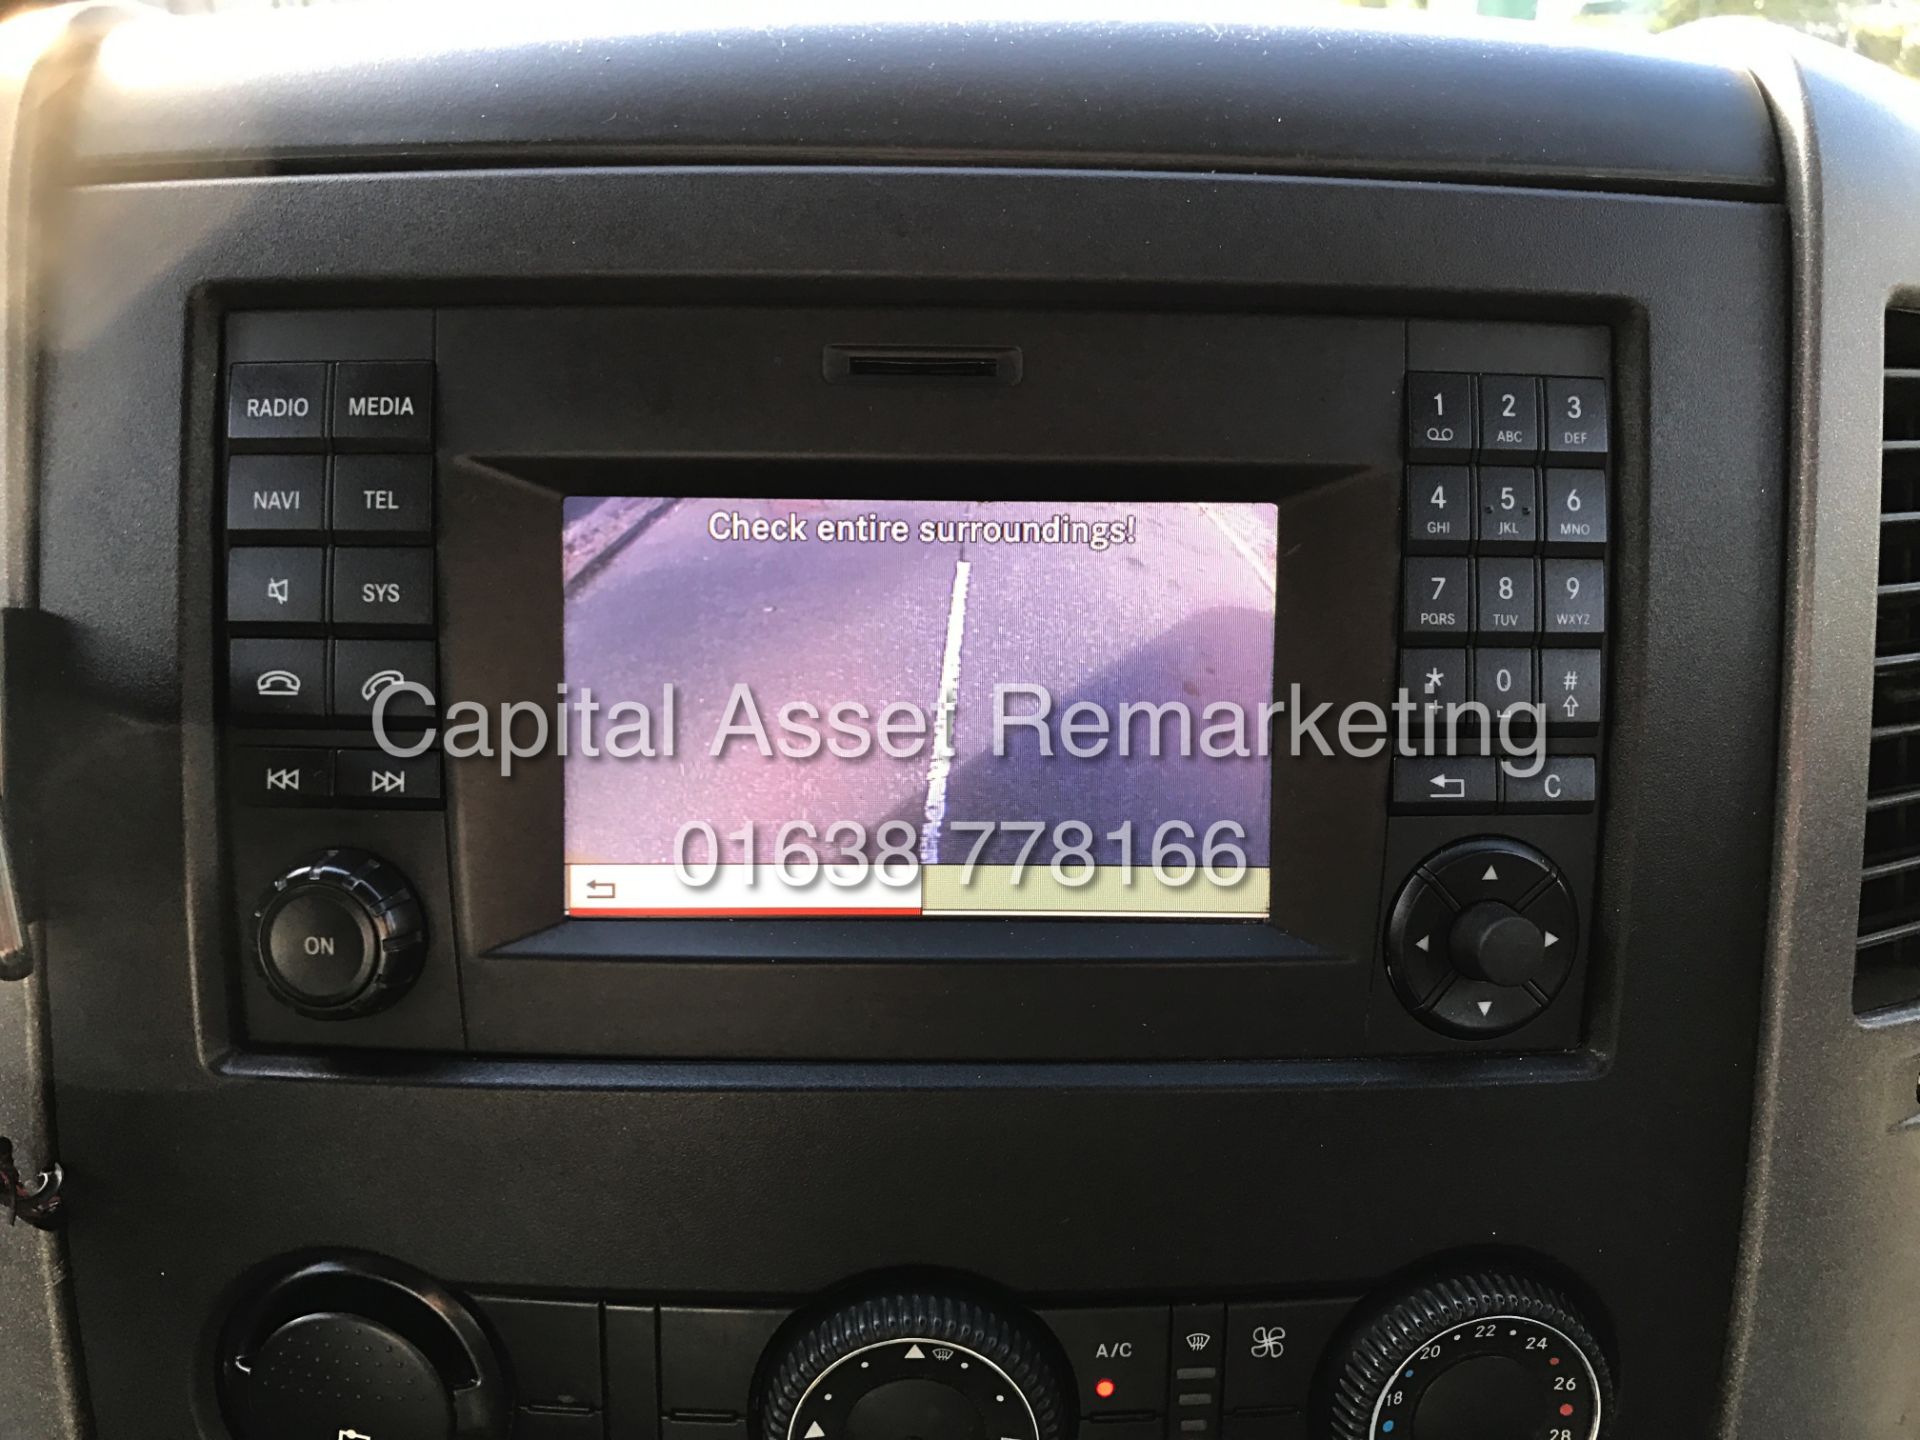 MERCEDES SPRINTER 313CDI LONG WHEEL BASE HIGH ROOF - AIR CON - 1 OWNER - 2014 REG - IDEAL CAMPER!!! - Image 10 of 12